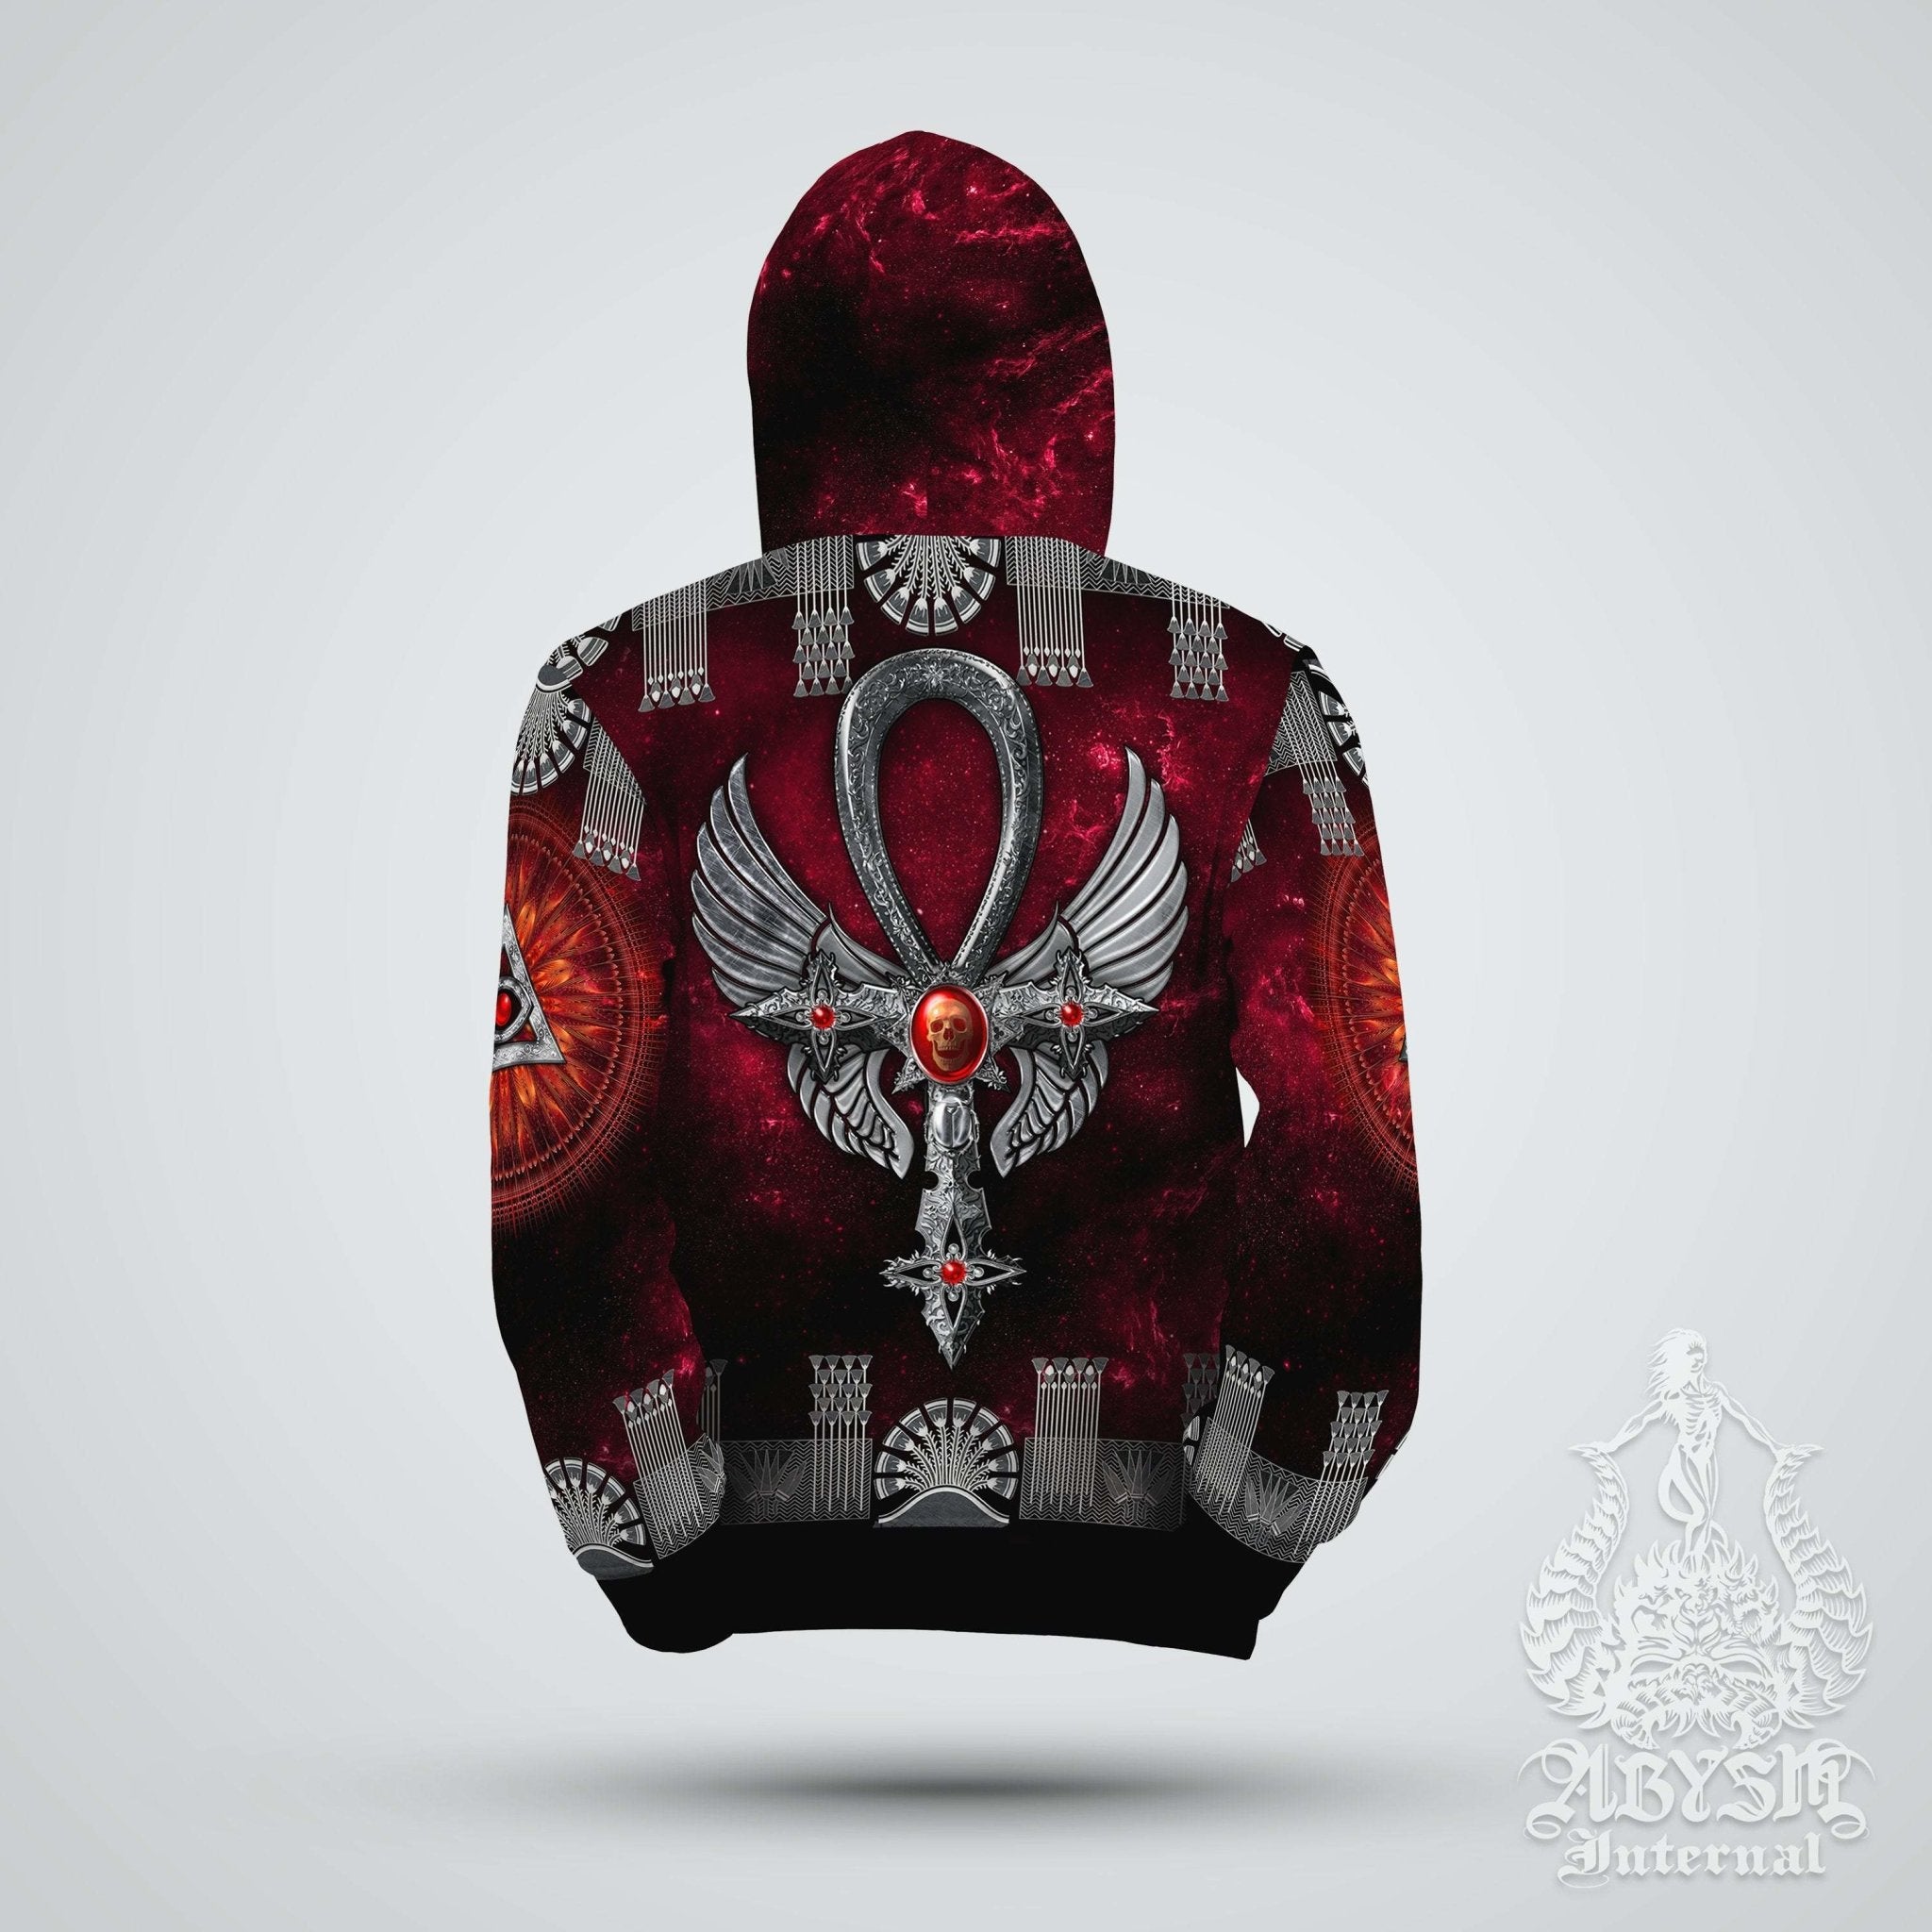 Occult Hoodie, Gothic Streetwear, Egyptian Goth Outfit, Alternative Clothing, Unisex - Ankh Cross - Abysm Internal